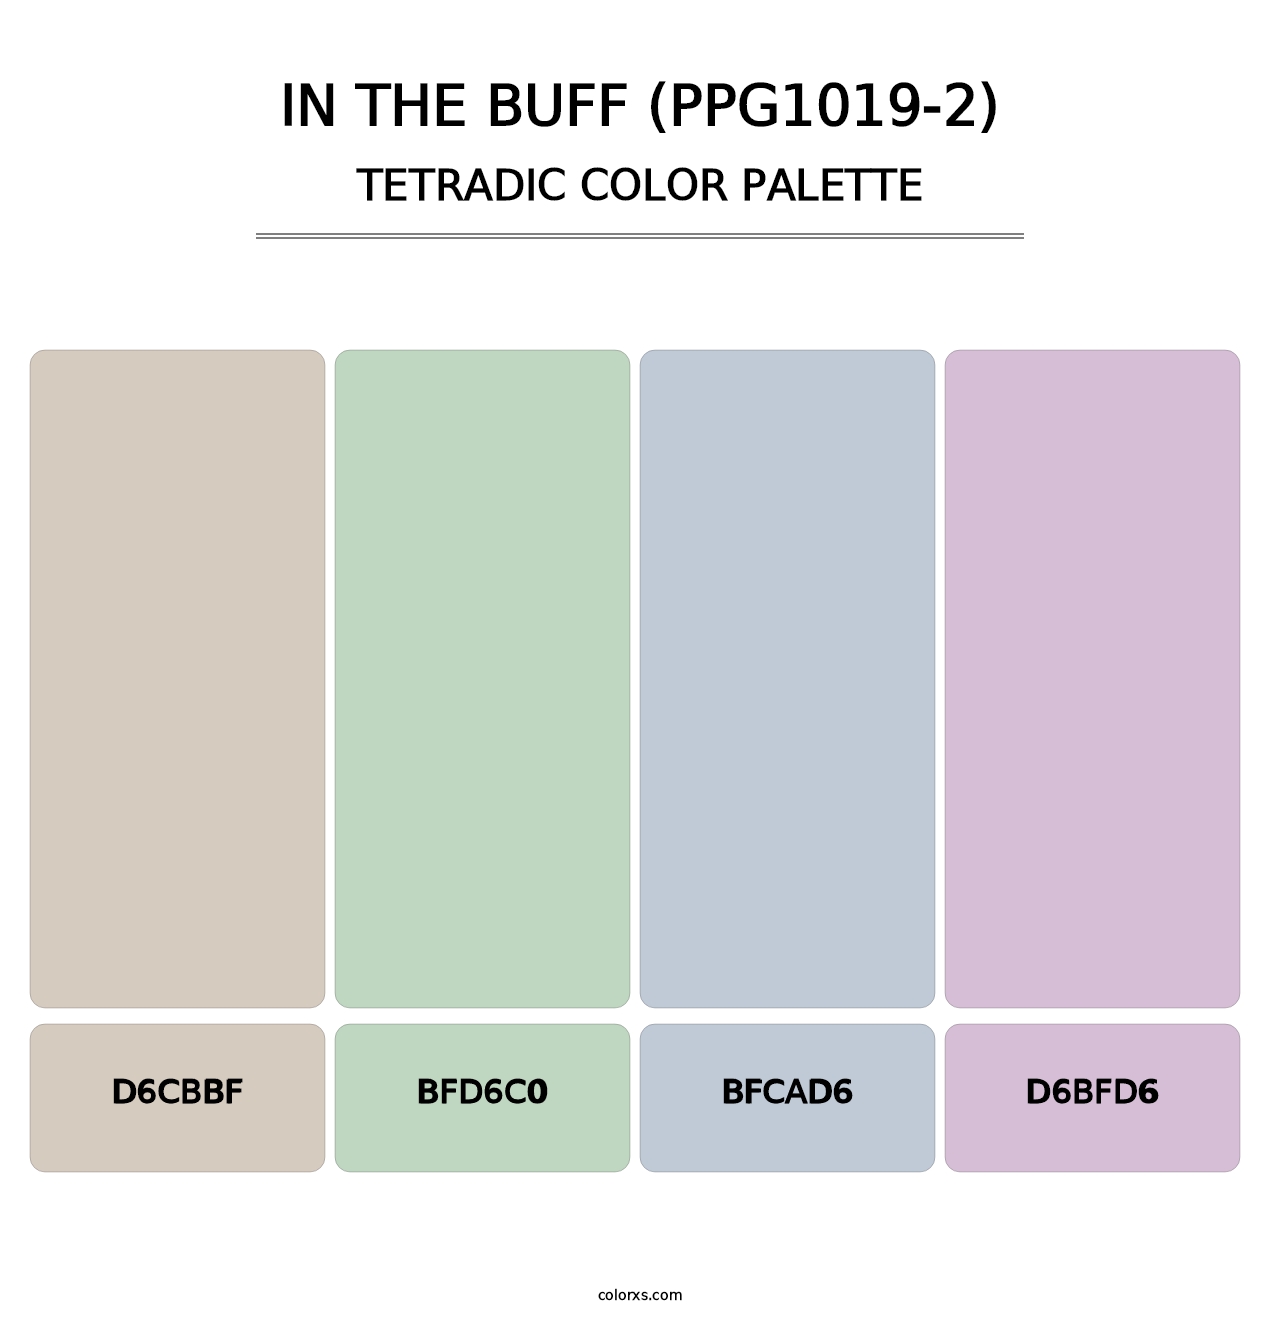 In The Buff (PPG1019-2) - Tetradic Color Palette